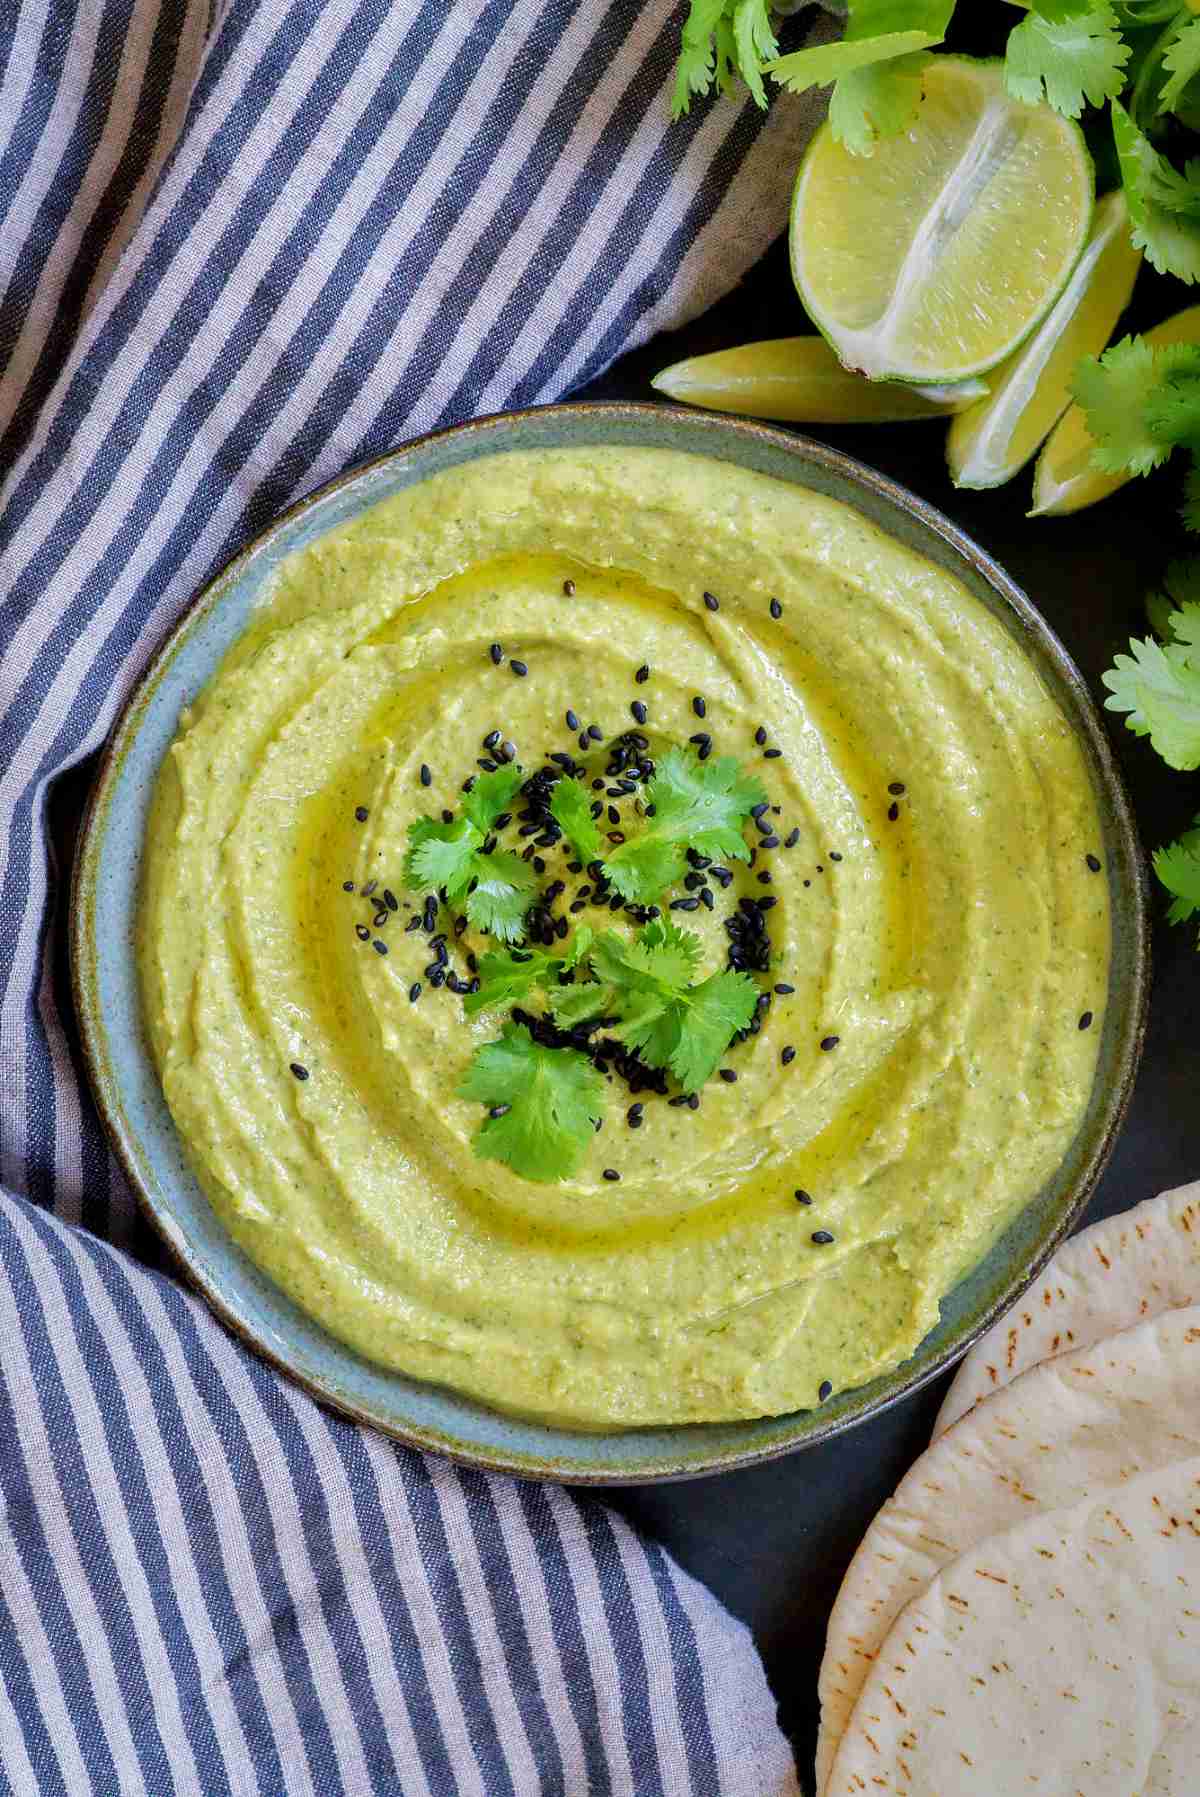 Green hummus on a plate with limes and cilantro.